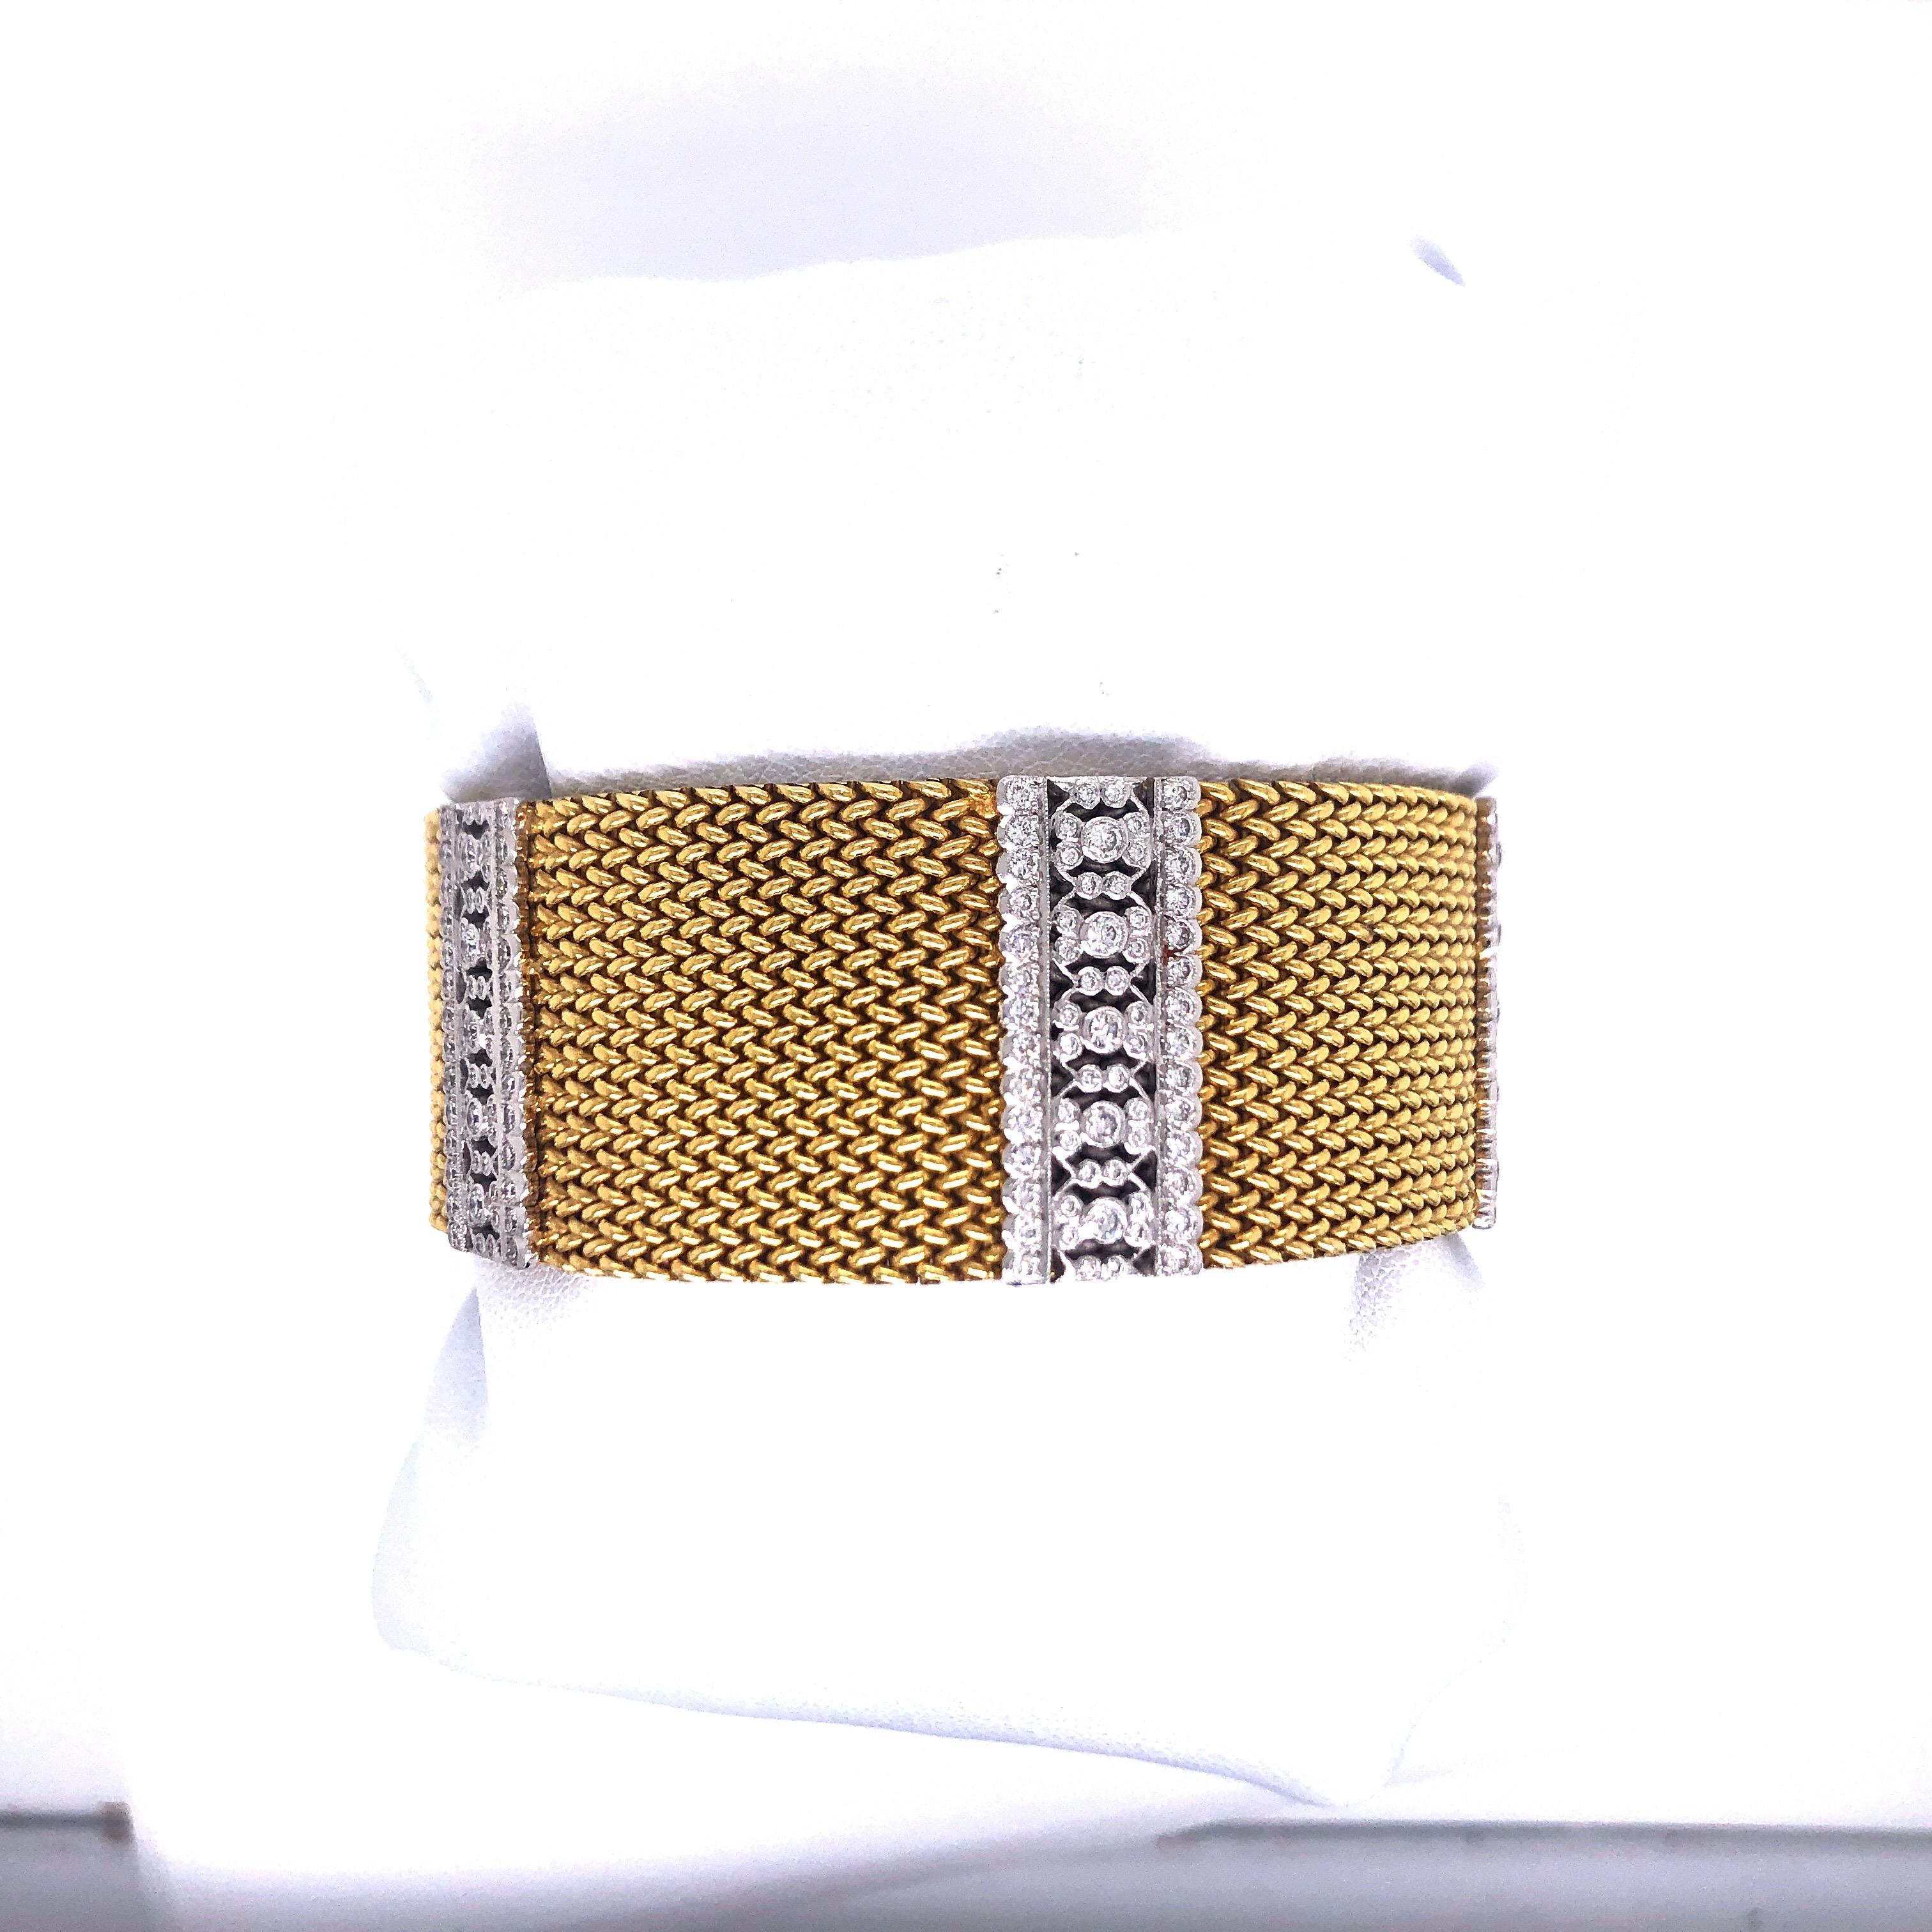 18K Yellow Gold Mesh Bracelet with Five Diamond Stations set in White Gold.  